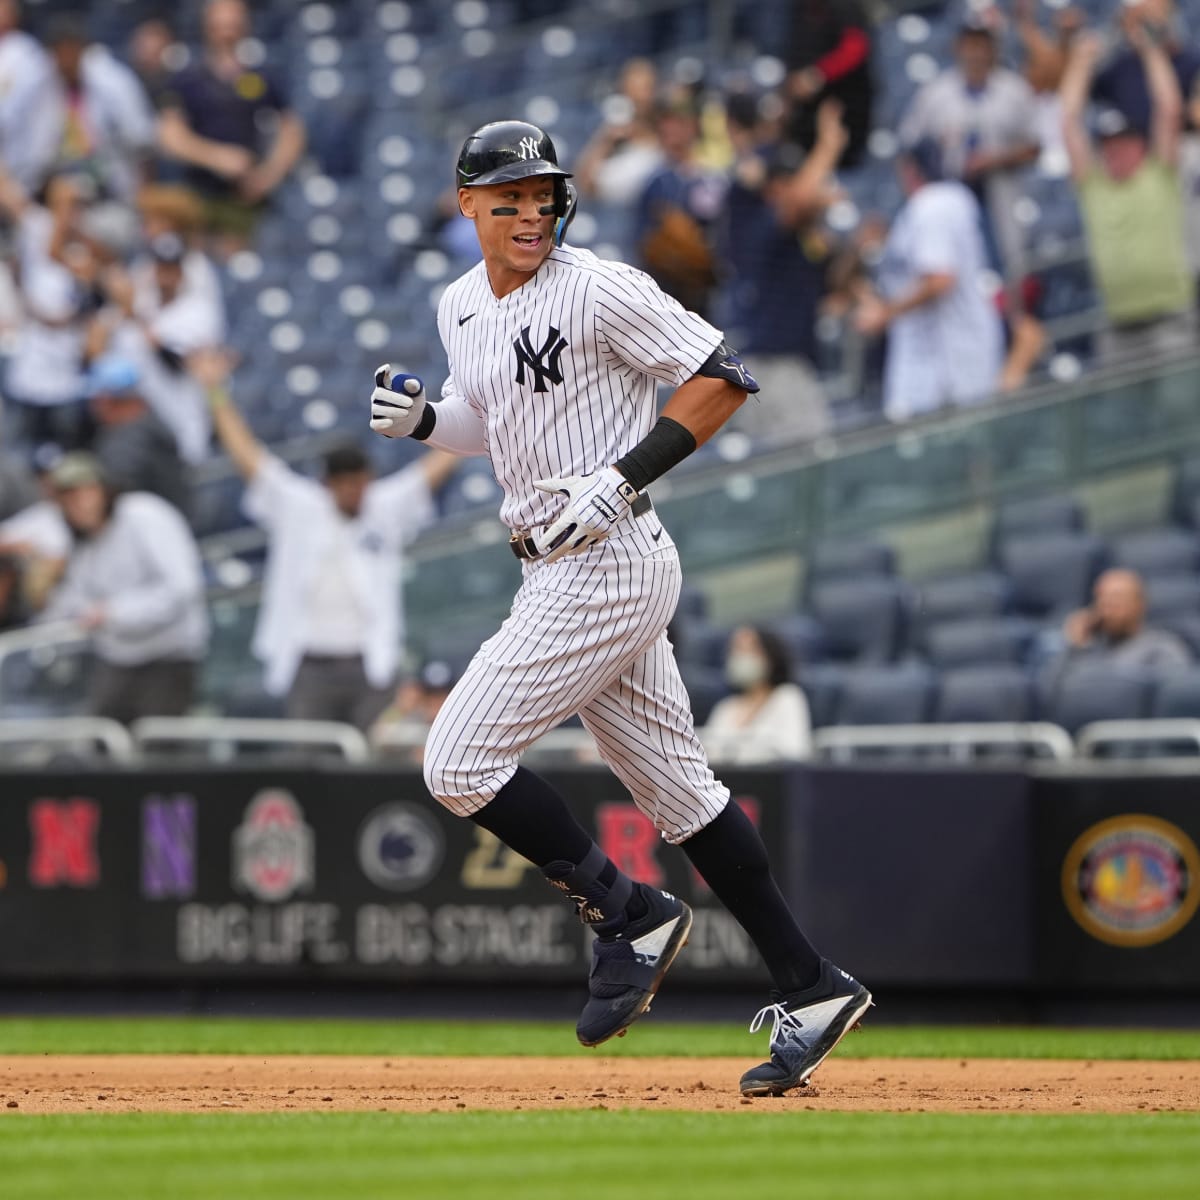 Aaron Judge keeps getting walked  which is how it should be